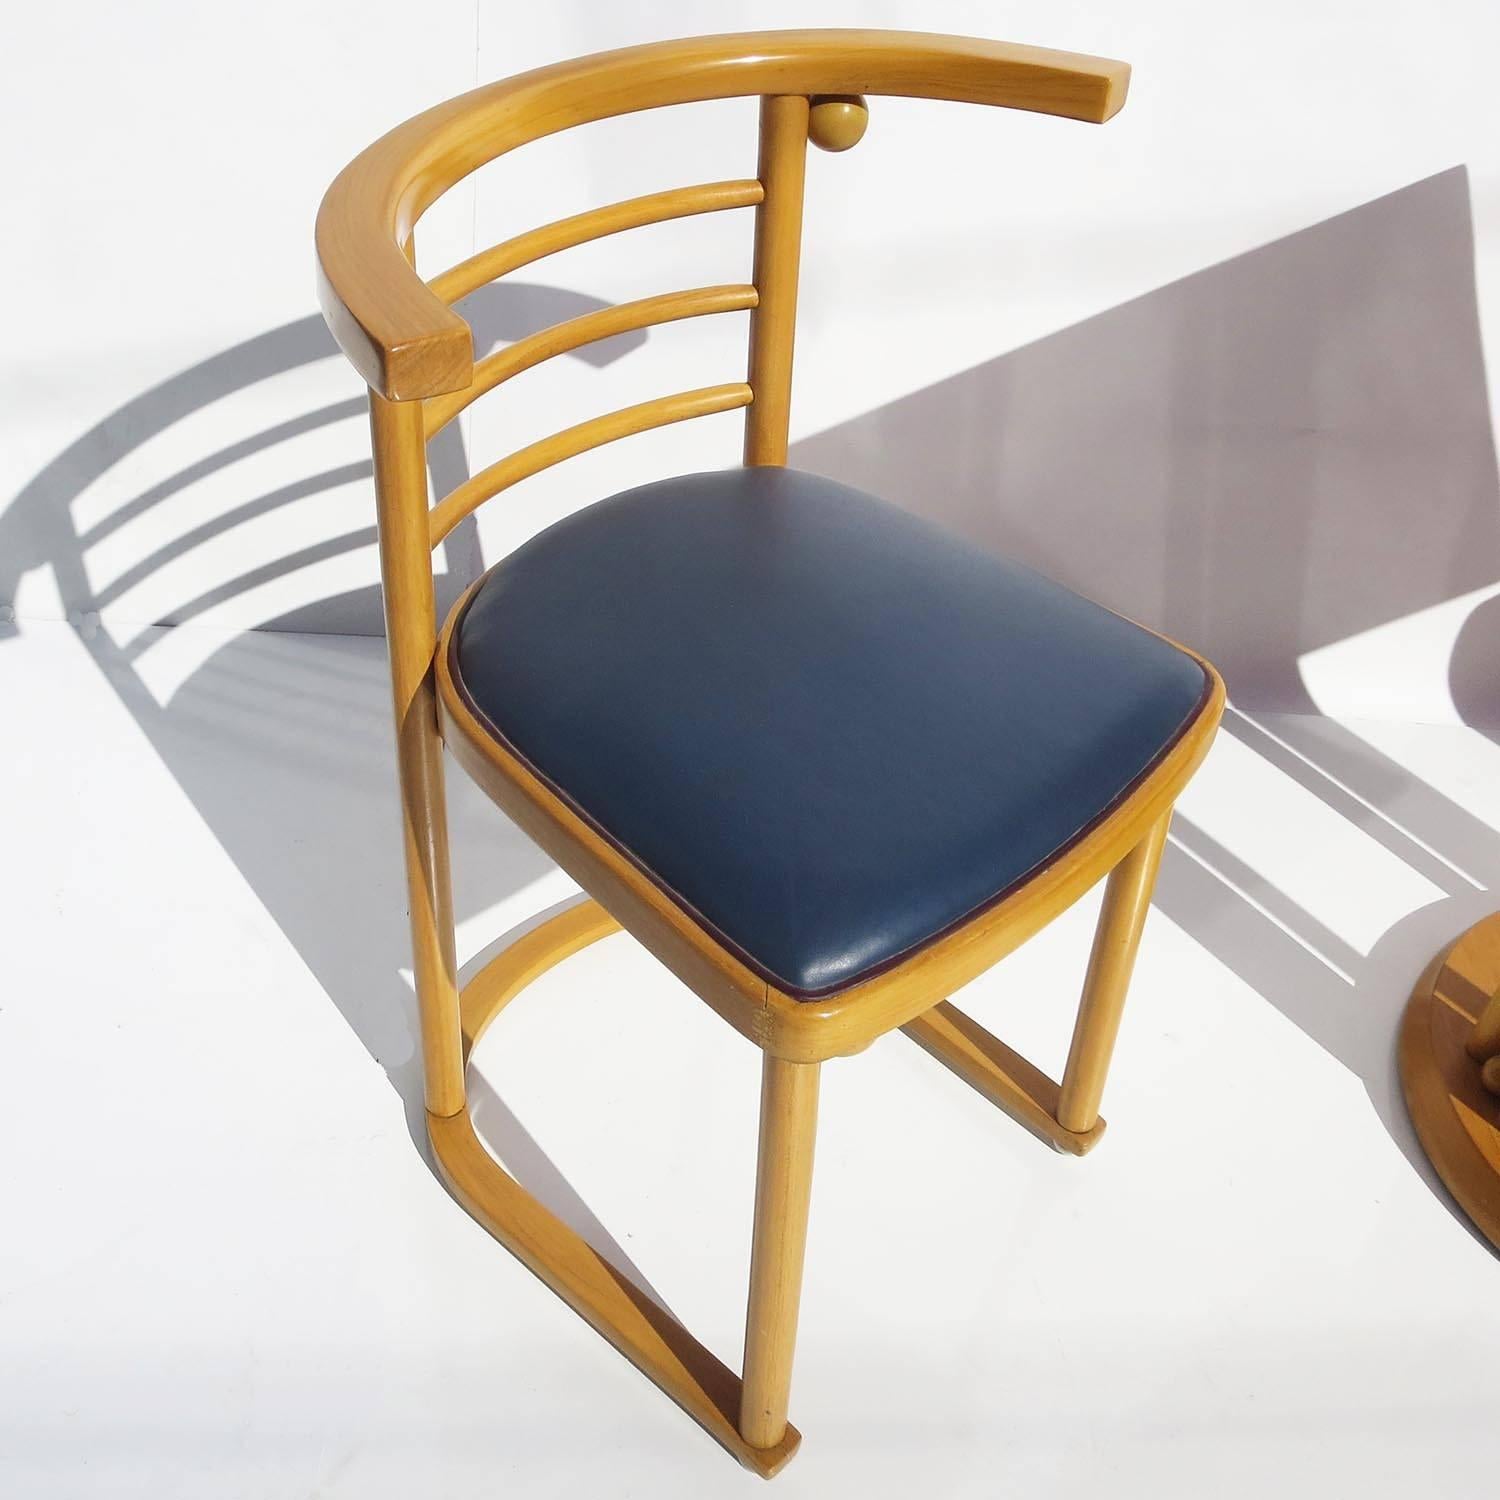 Opened in 1907 in Vienna, the Fledermaus Cabaret had interiors designed by Austrian architect Josef Hoffmann. This design was so well received that it went into limited production by Kohn, and later by Thonet. Our set from the 1930s was refinished